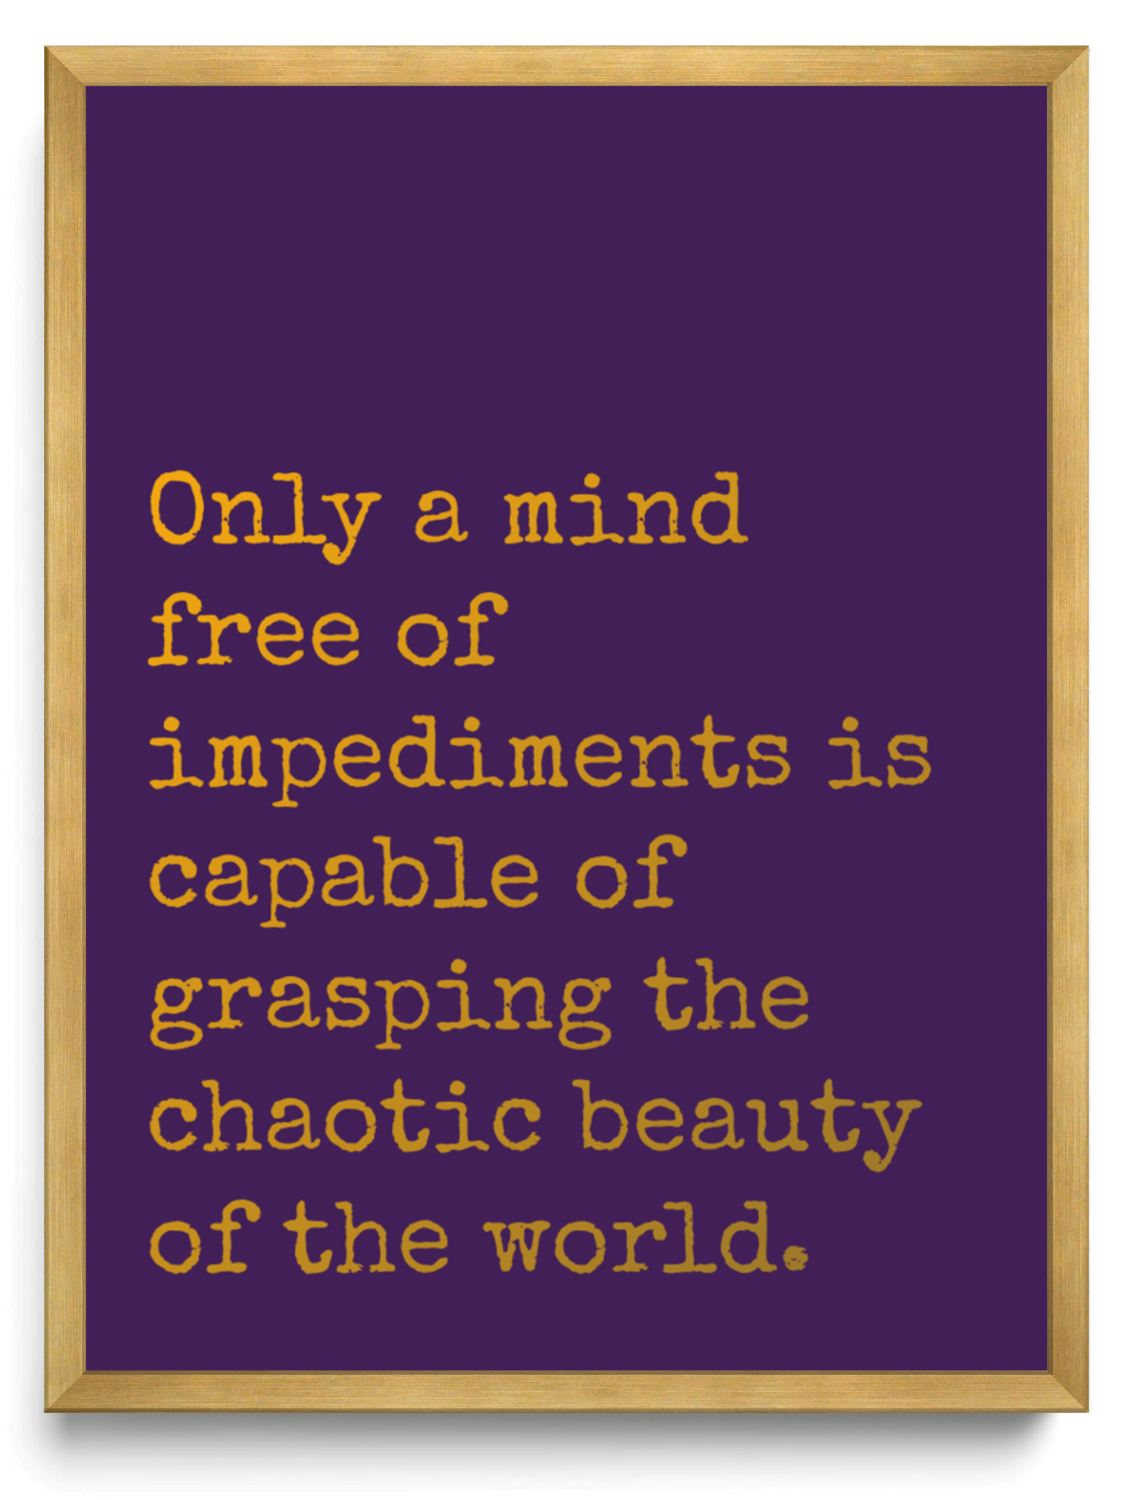 Only a mind free of impediments is capable of grasping the chaotic beauty of the world framed typographic print